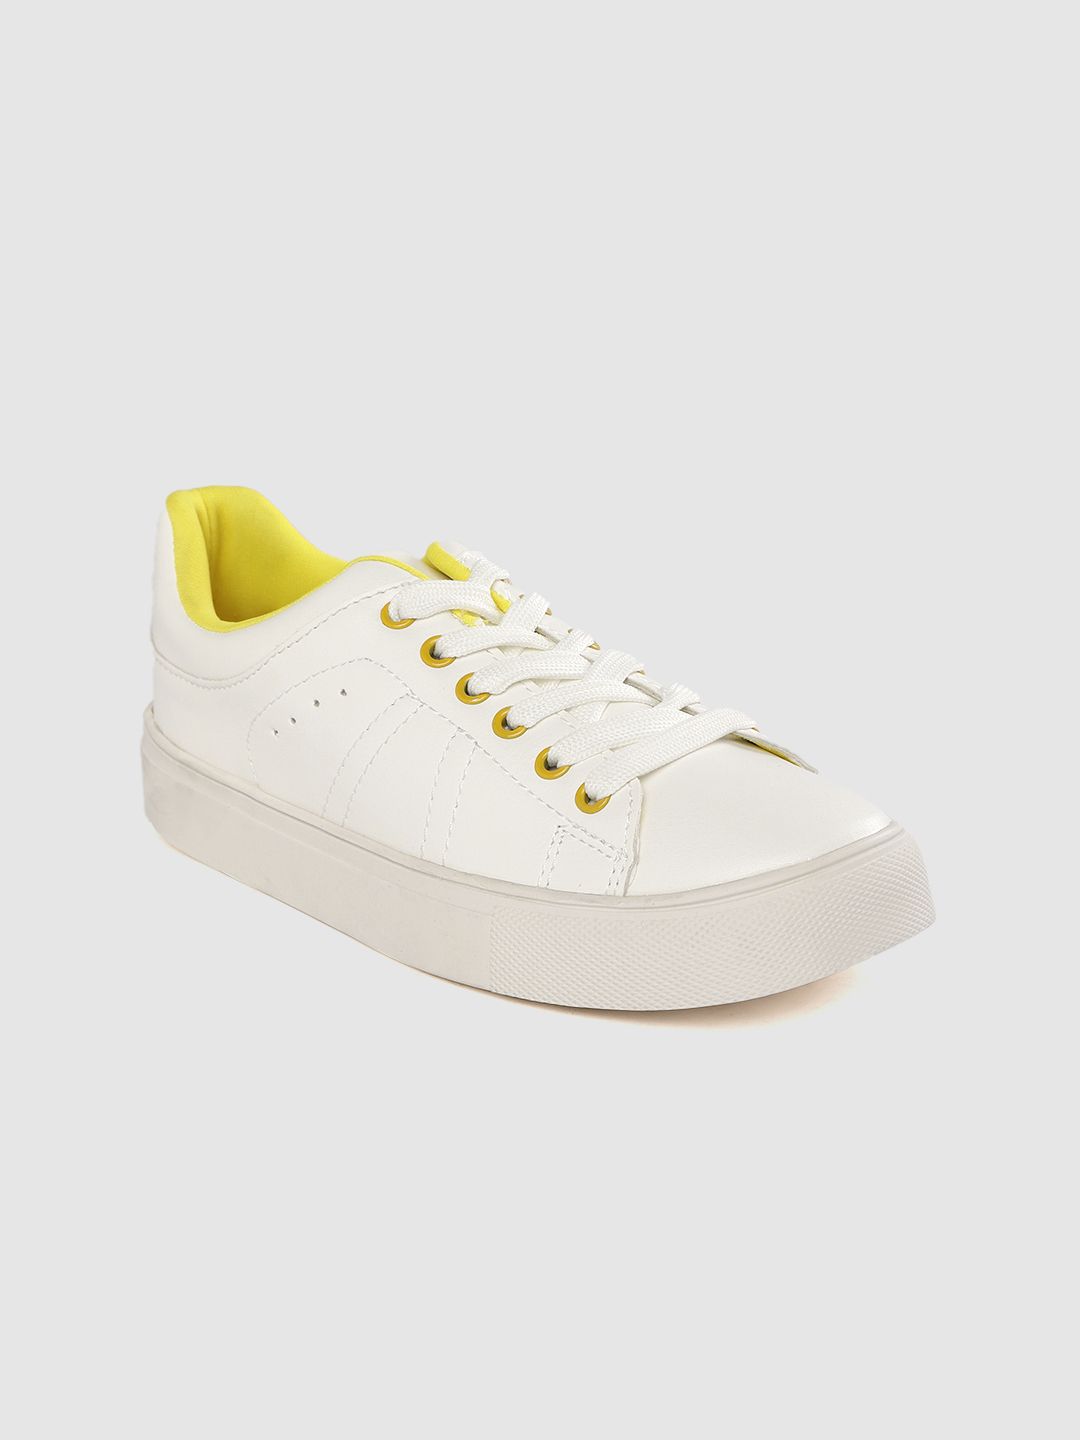 Jove Women White Solid Flatform Sneakers Price in India